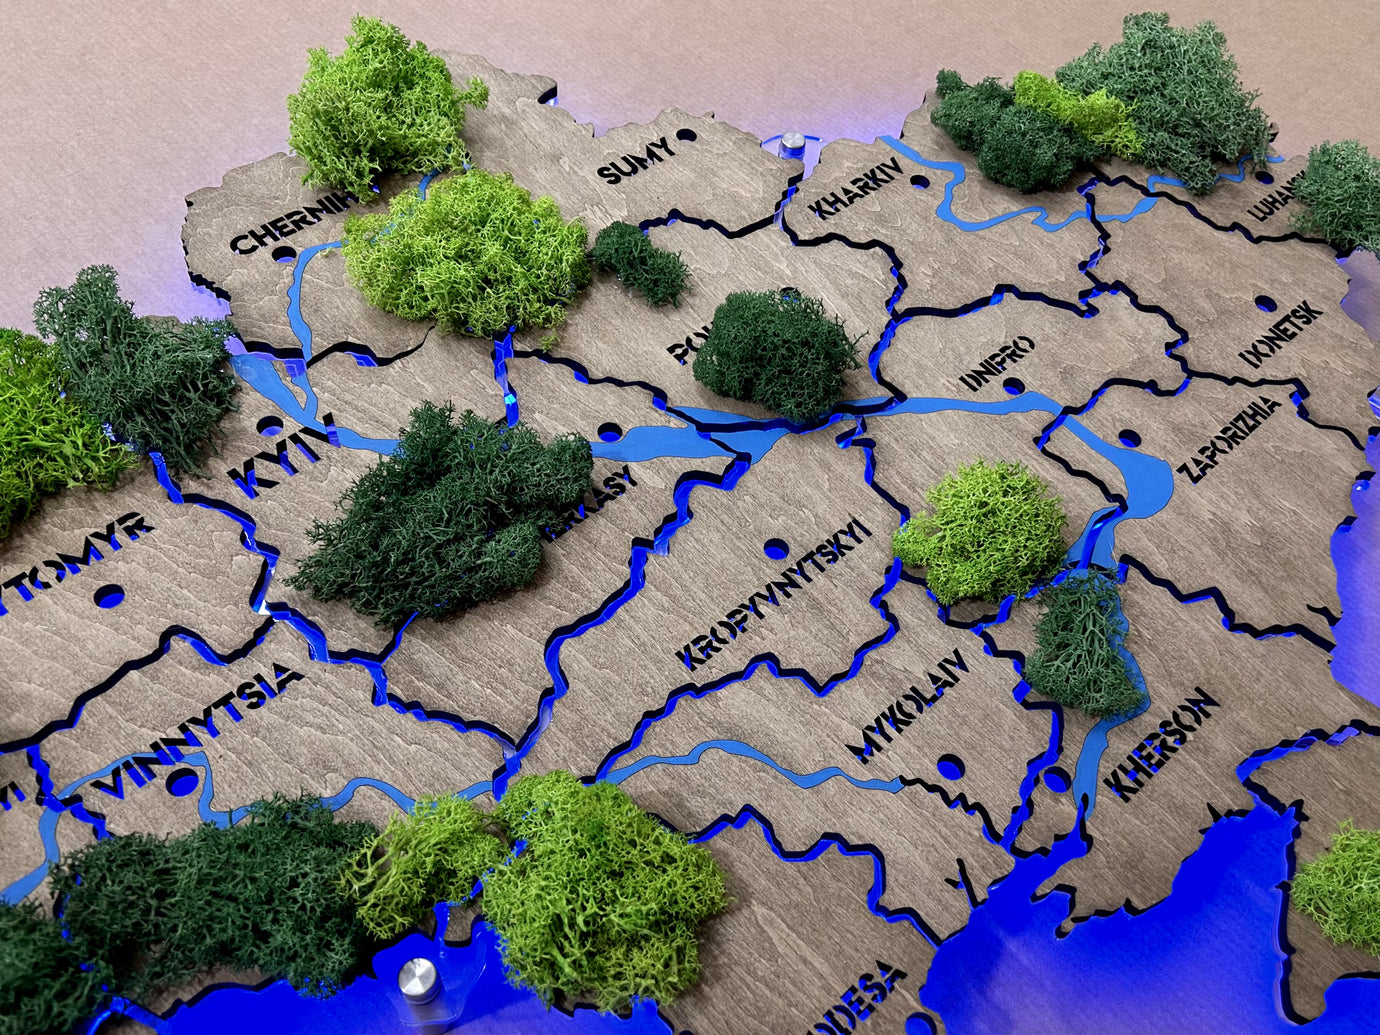 Ukraine RGB LED map on acrylic glass with rivers, moss and backlighting  between regions color Venge